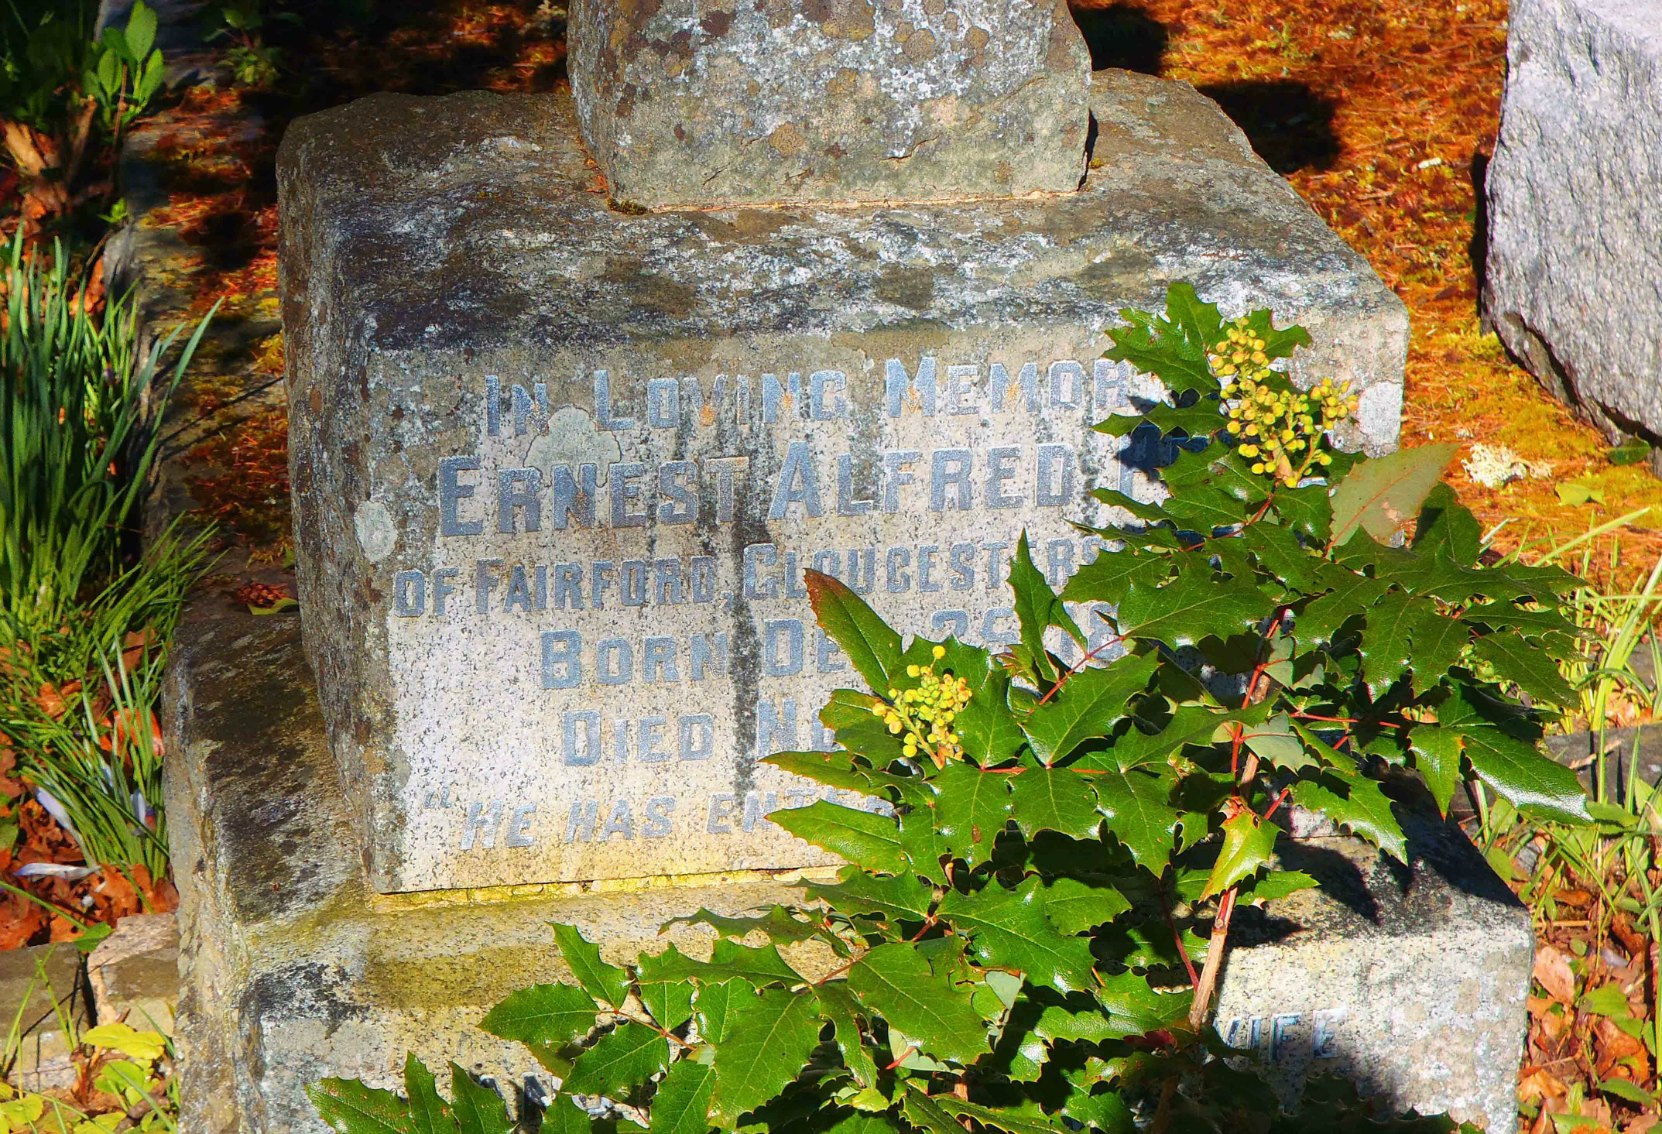 Ernest Alfred Price grave marker inscription, St. Peter's Quamichan Anglican cemetery, North Cowichan.